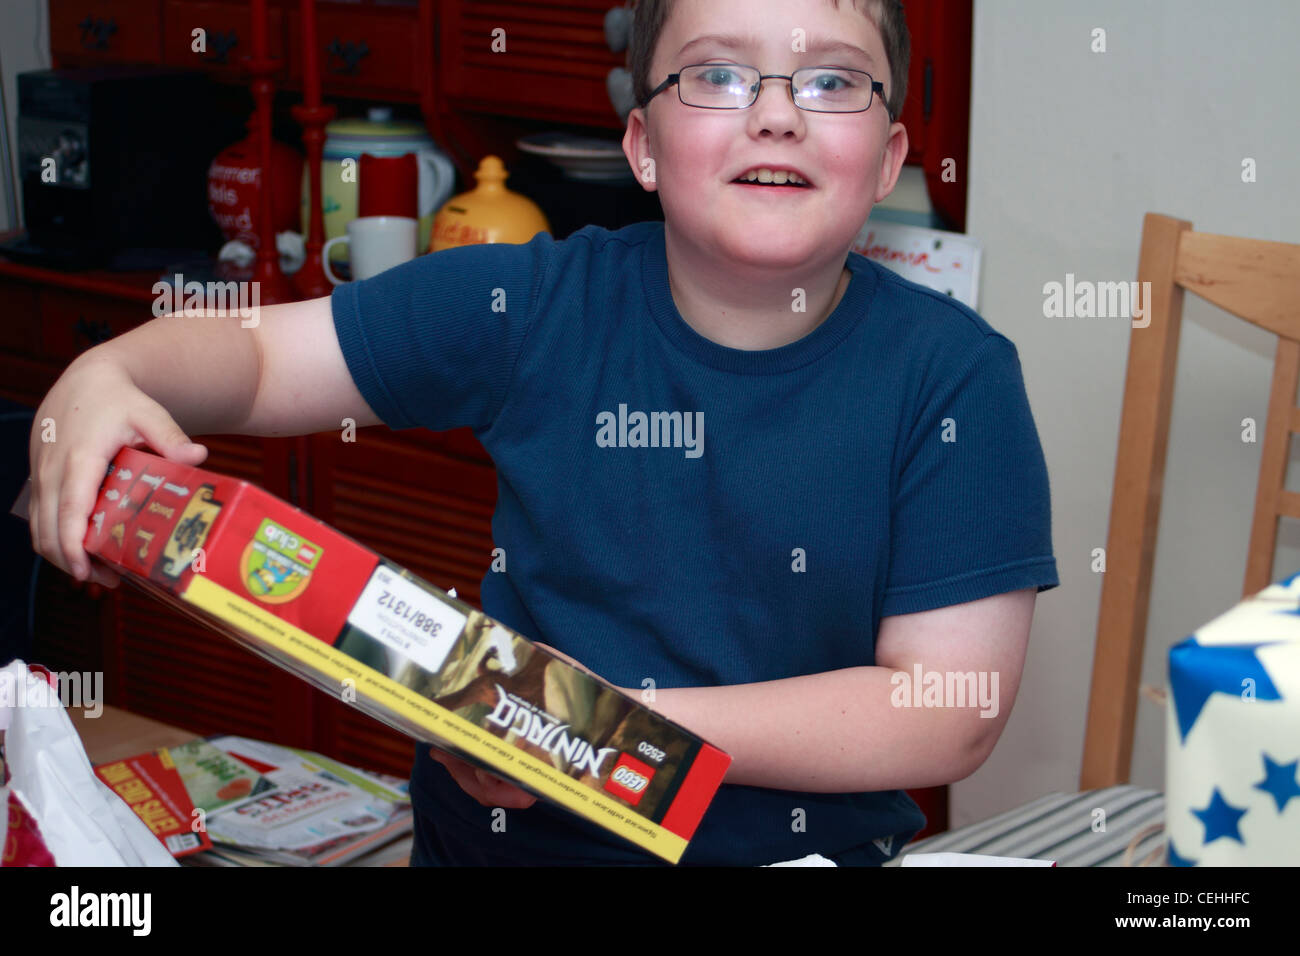 Lewis opening his presents on his tenth birthday Stock Photo